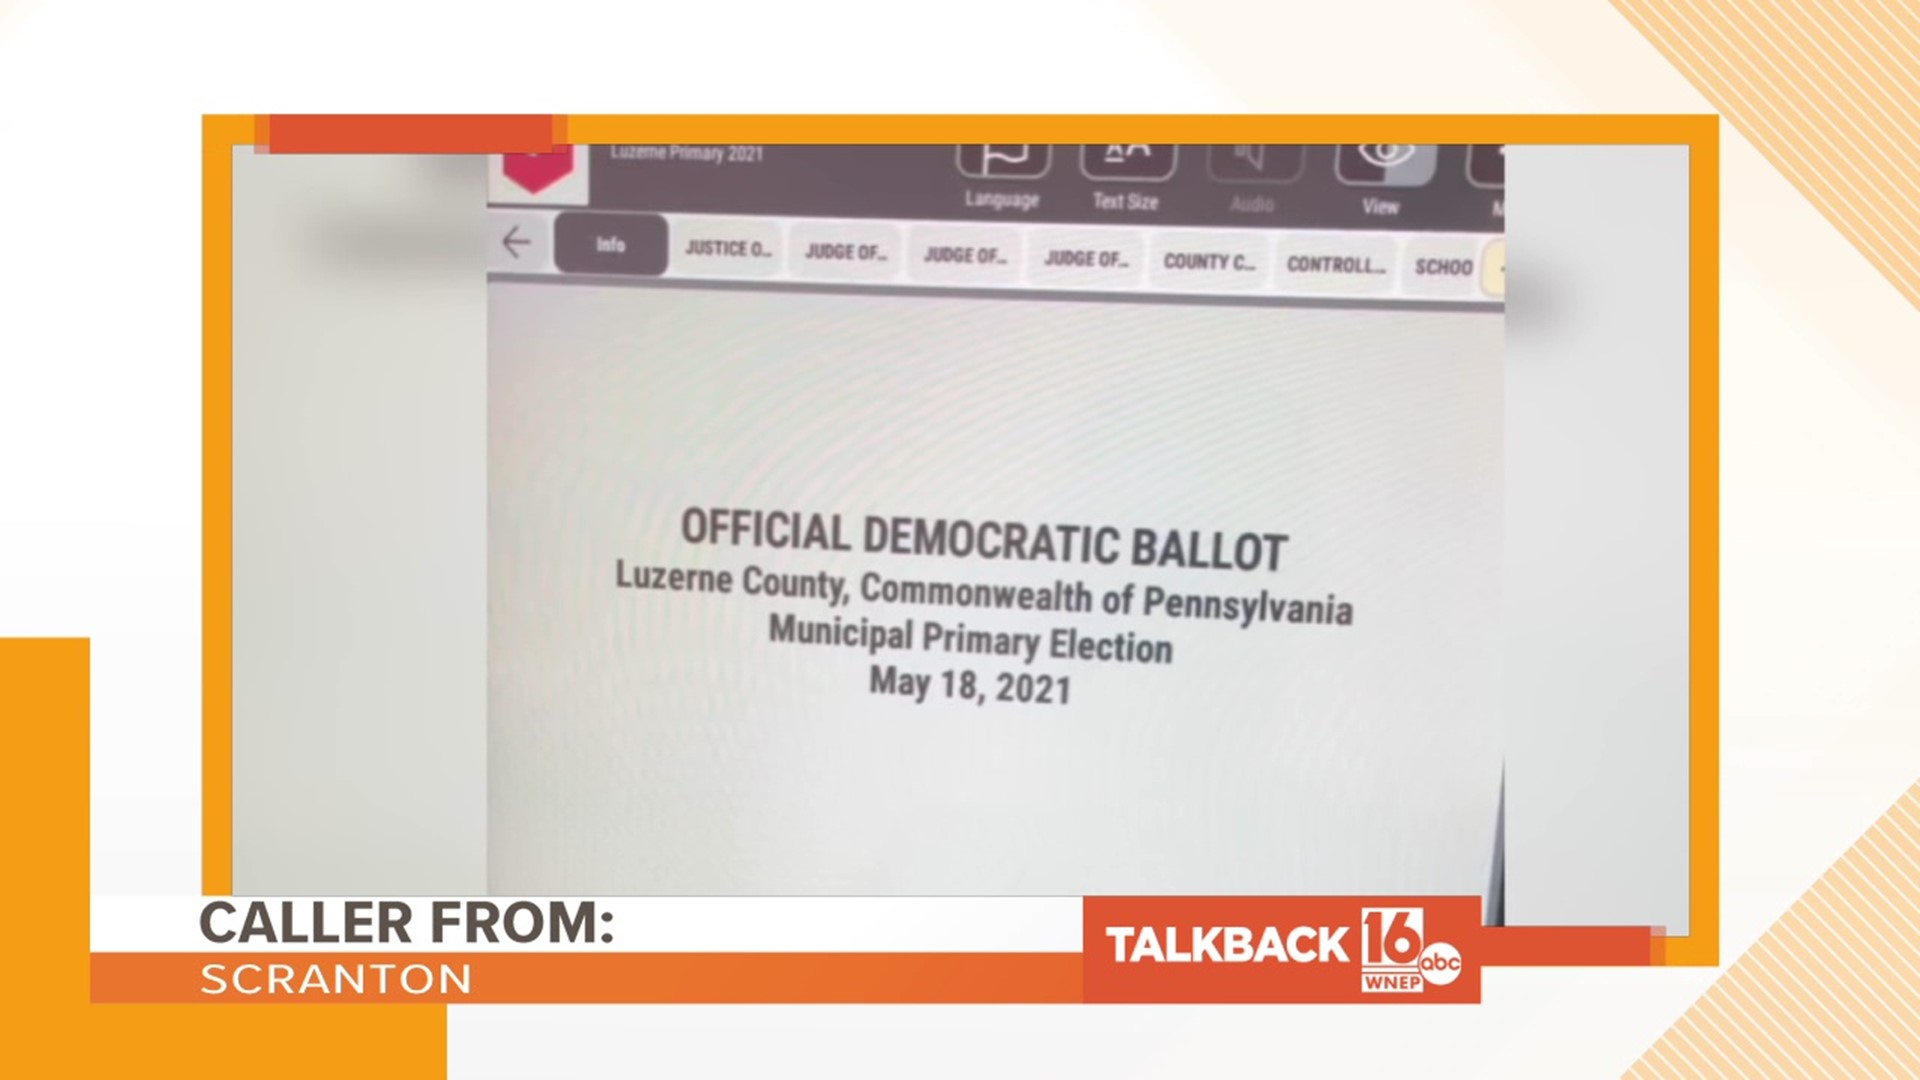 A caller from Scranton says that paper ballots should return since there was trouble with voting machines in Luzerne County.